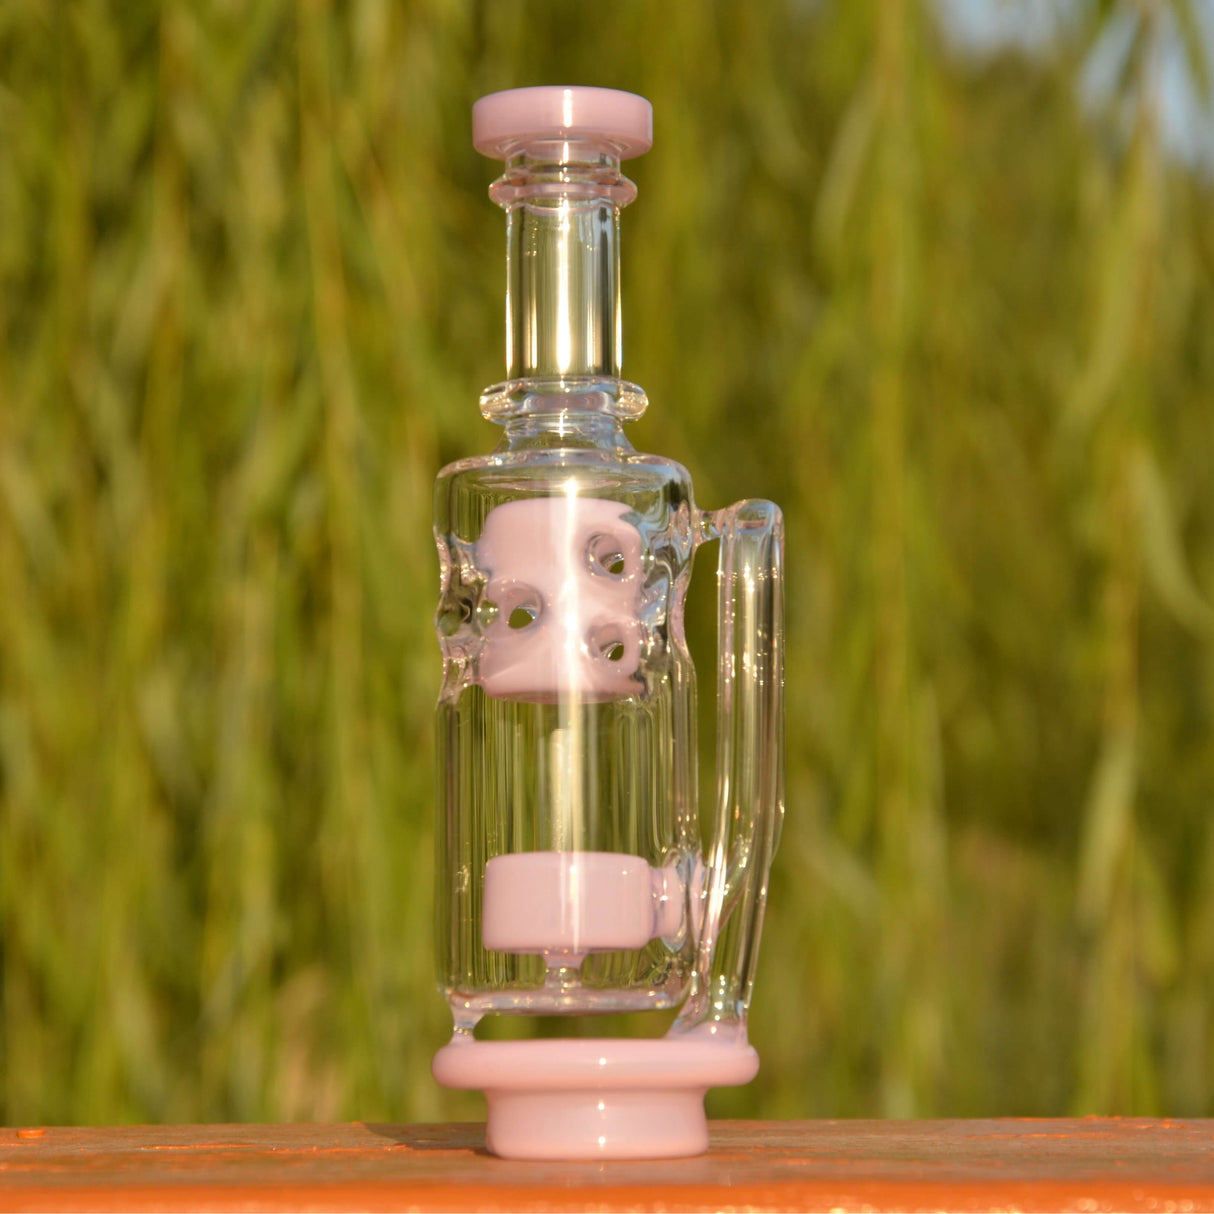 Calibear Straight Fab Carta Attachment in pink, compact borosilicate glass, for e-rigs and vaporizers